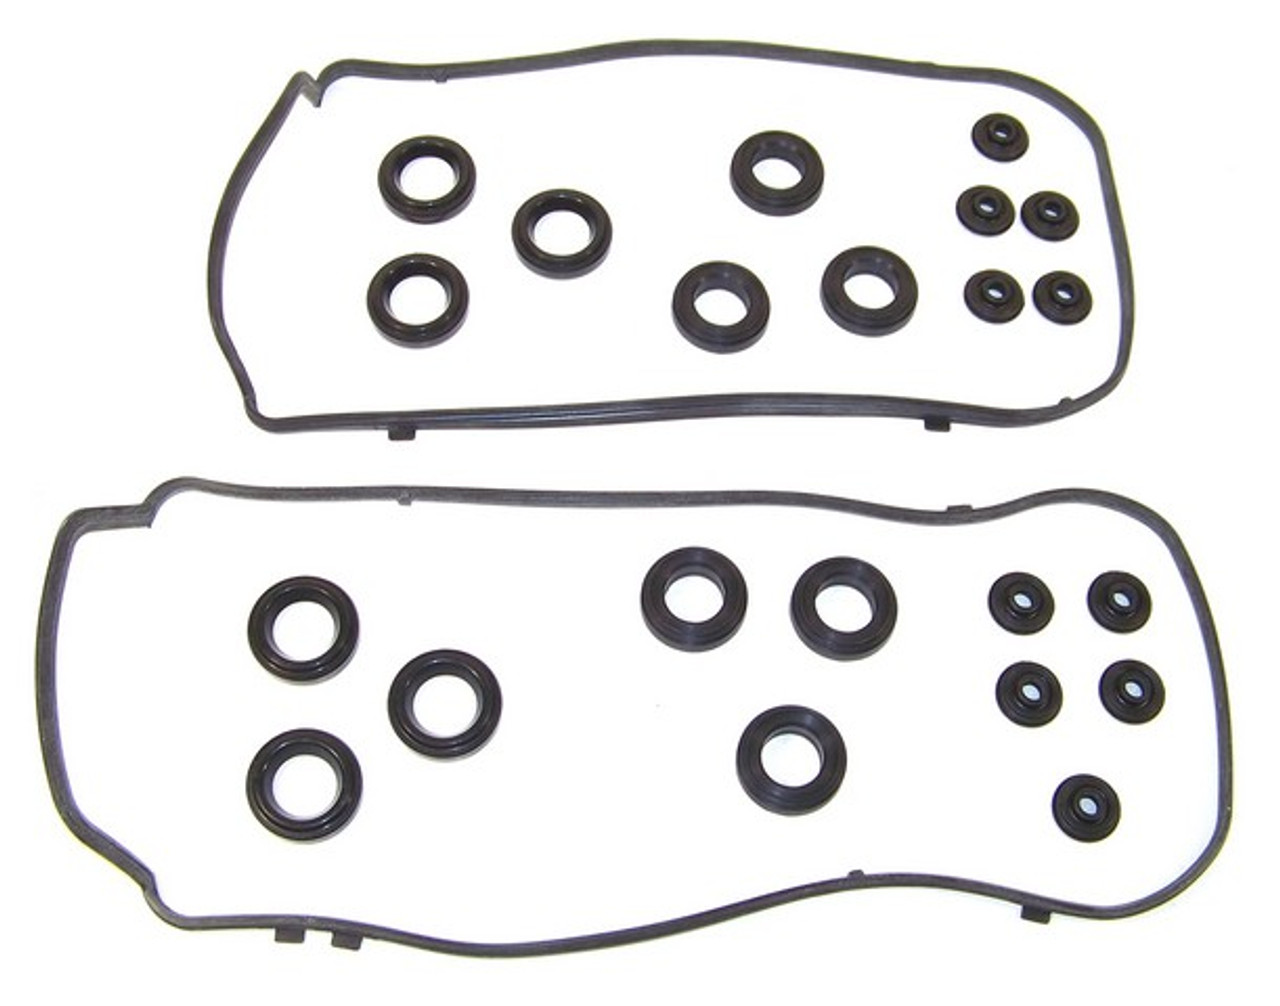 Valve Cover Gasket Set 3.5L 2010 Acura TL - VC268G.16